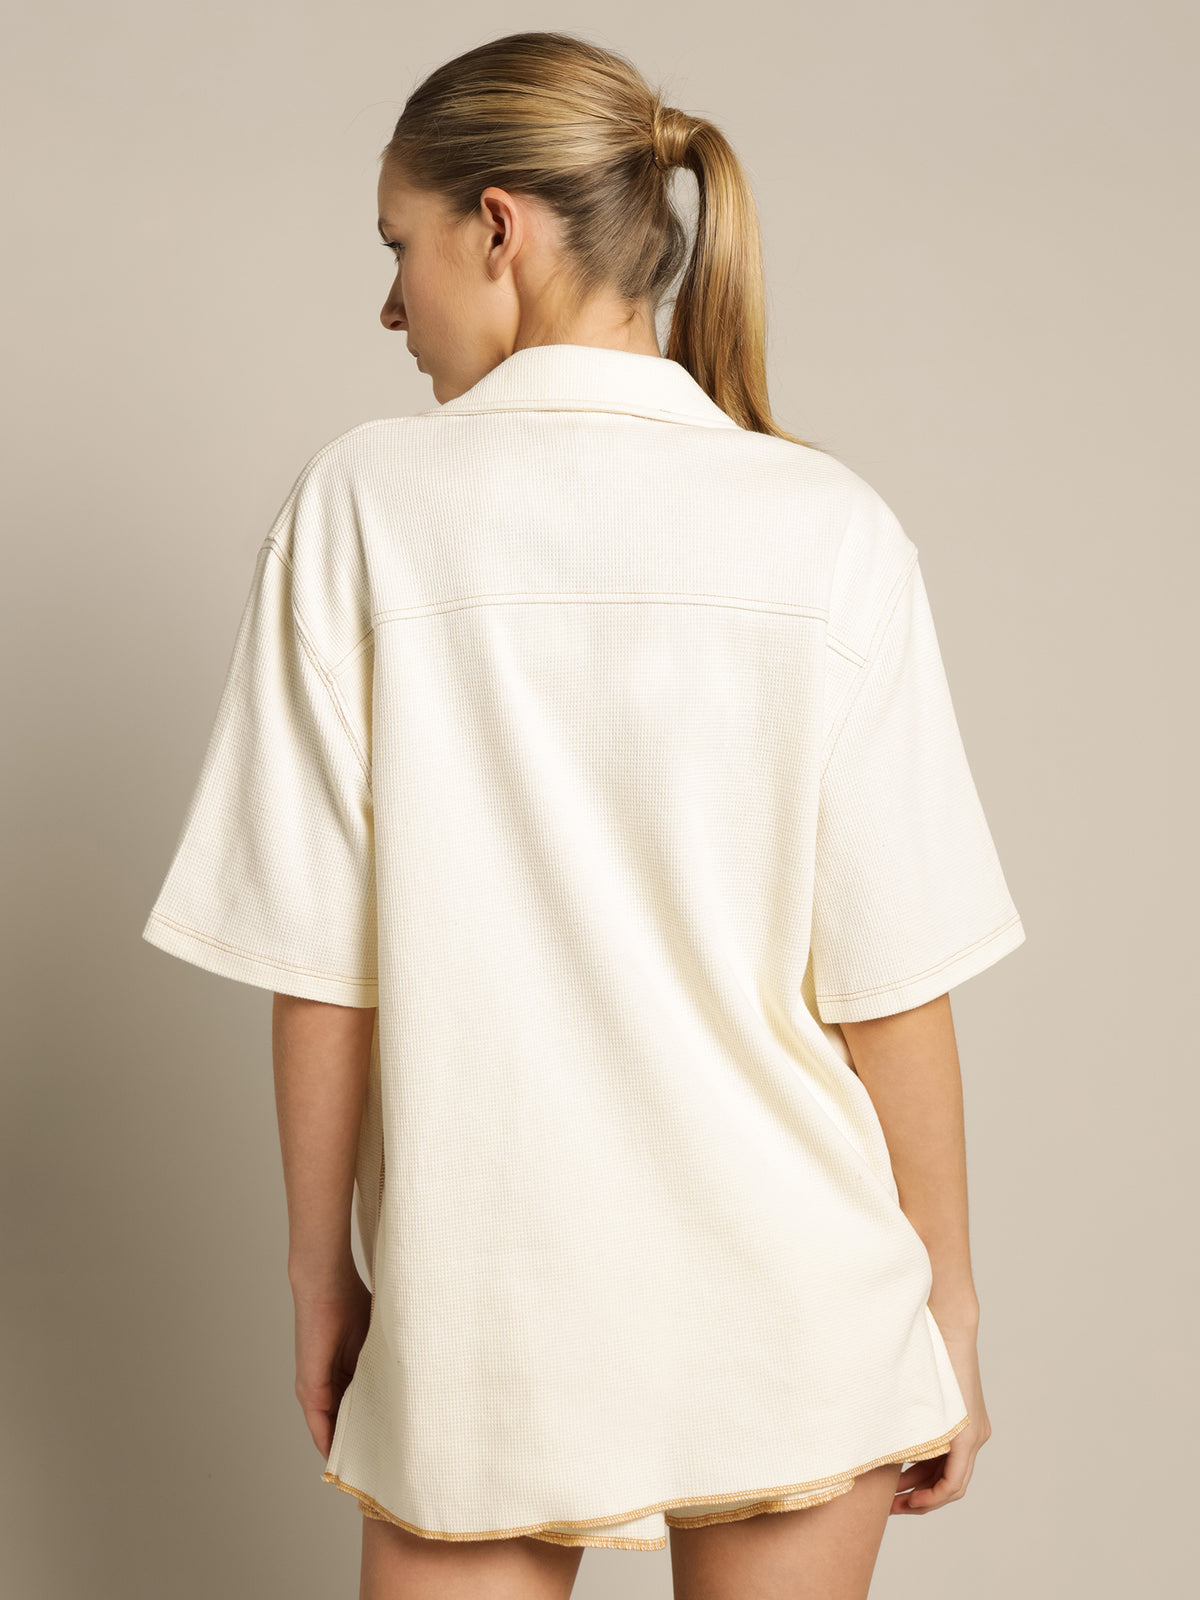 Re:bound Waffle Bowling Shirt in Chalk White